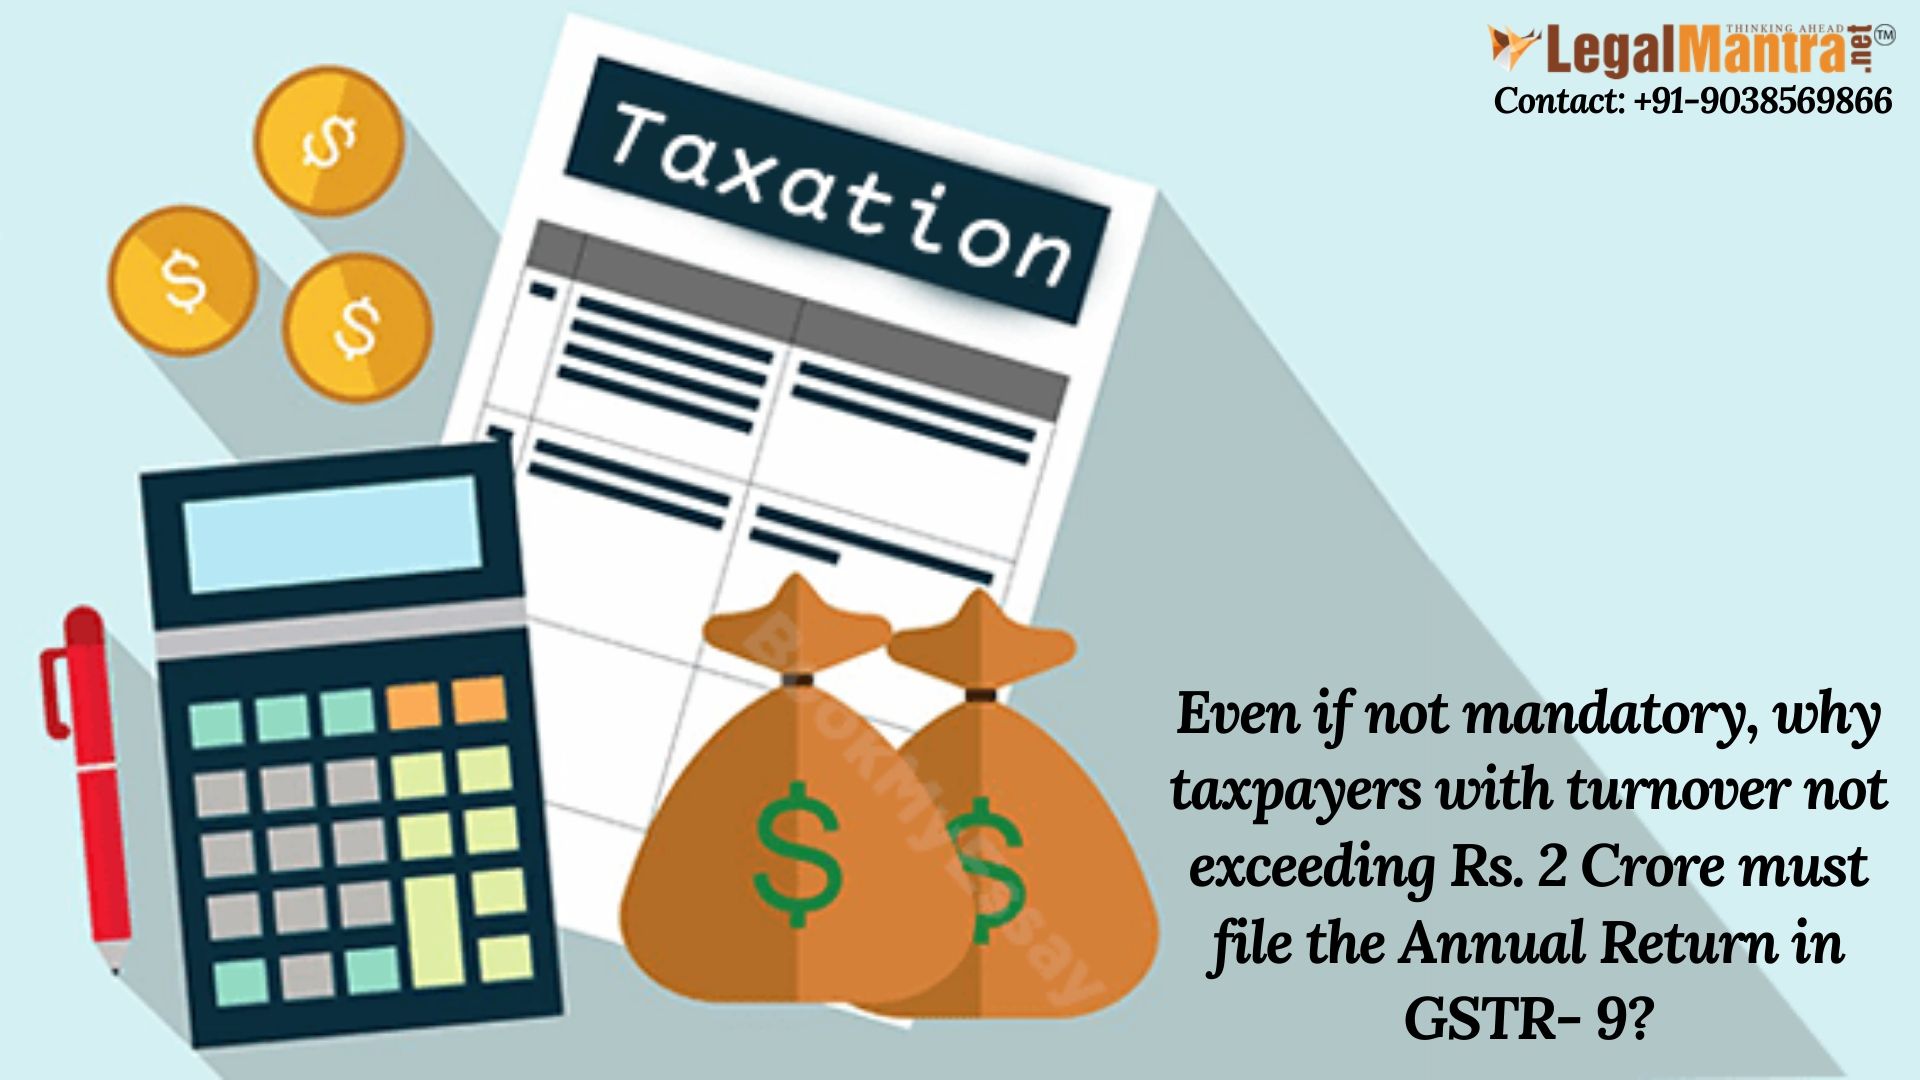 Even if not mandatory, why taxpayers with turnover not exceeding Rs. 2 Crore must file the Annual Return in GSTR- 9